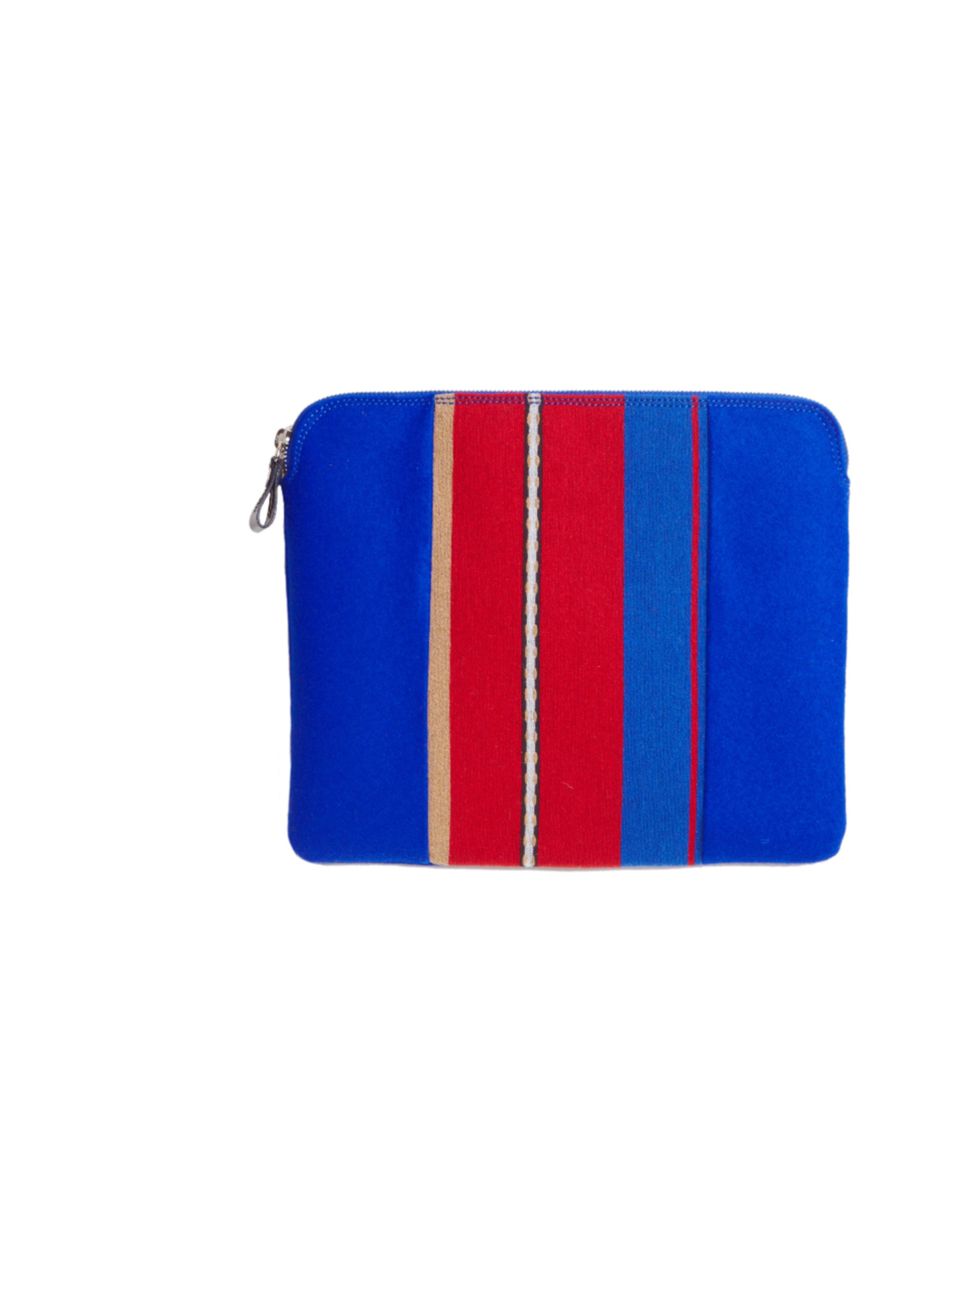 <p>As much as we should be filling it with an iPad well be making this case our favourite off-duty clutch <a href="http://carven.com/">Carven</a> iPad case, £155</p>